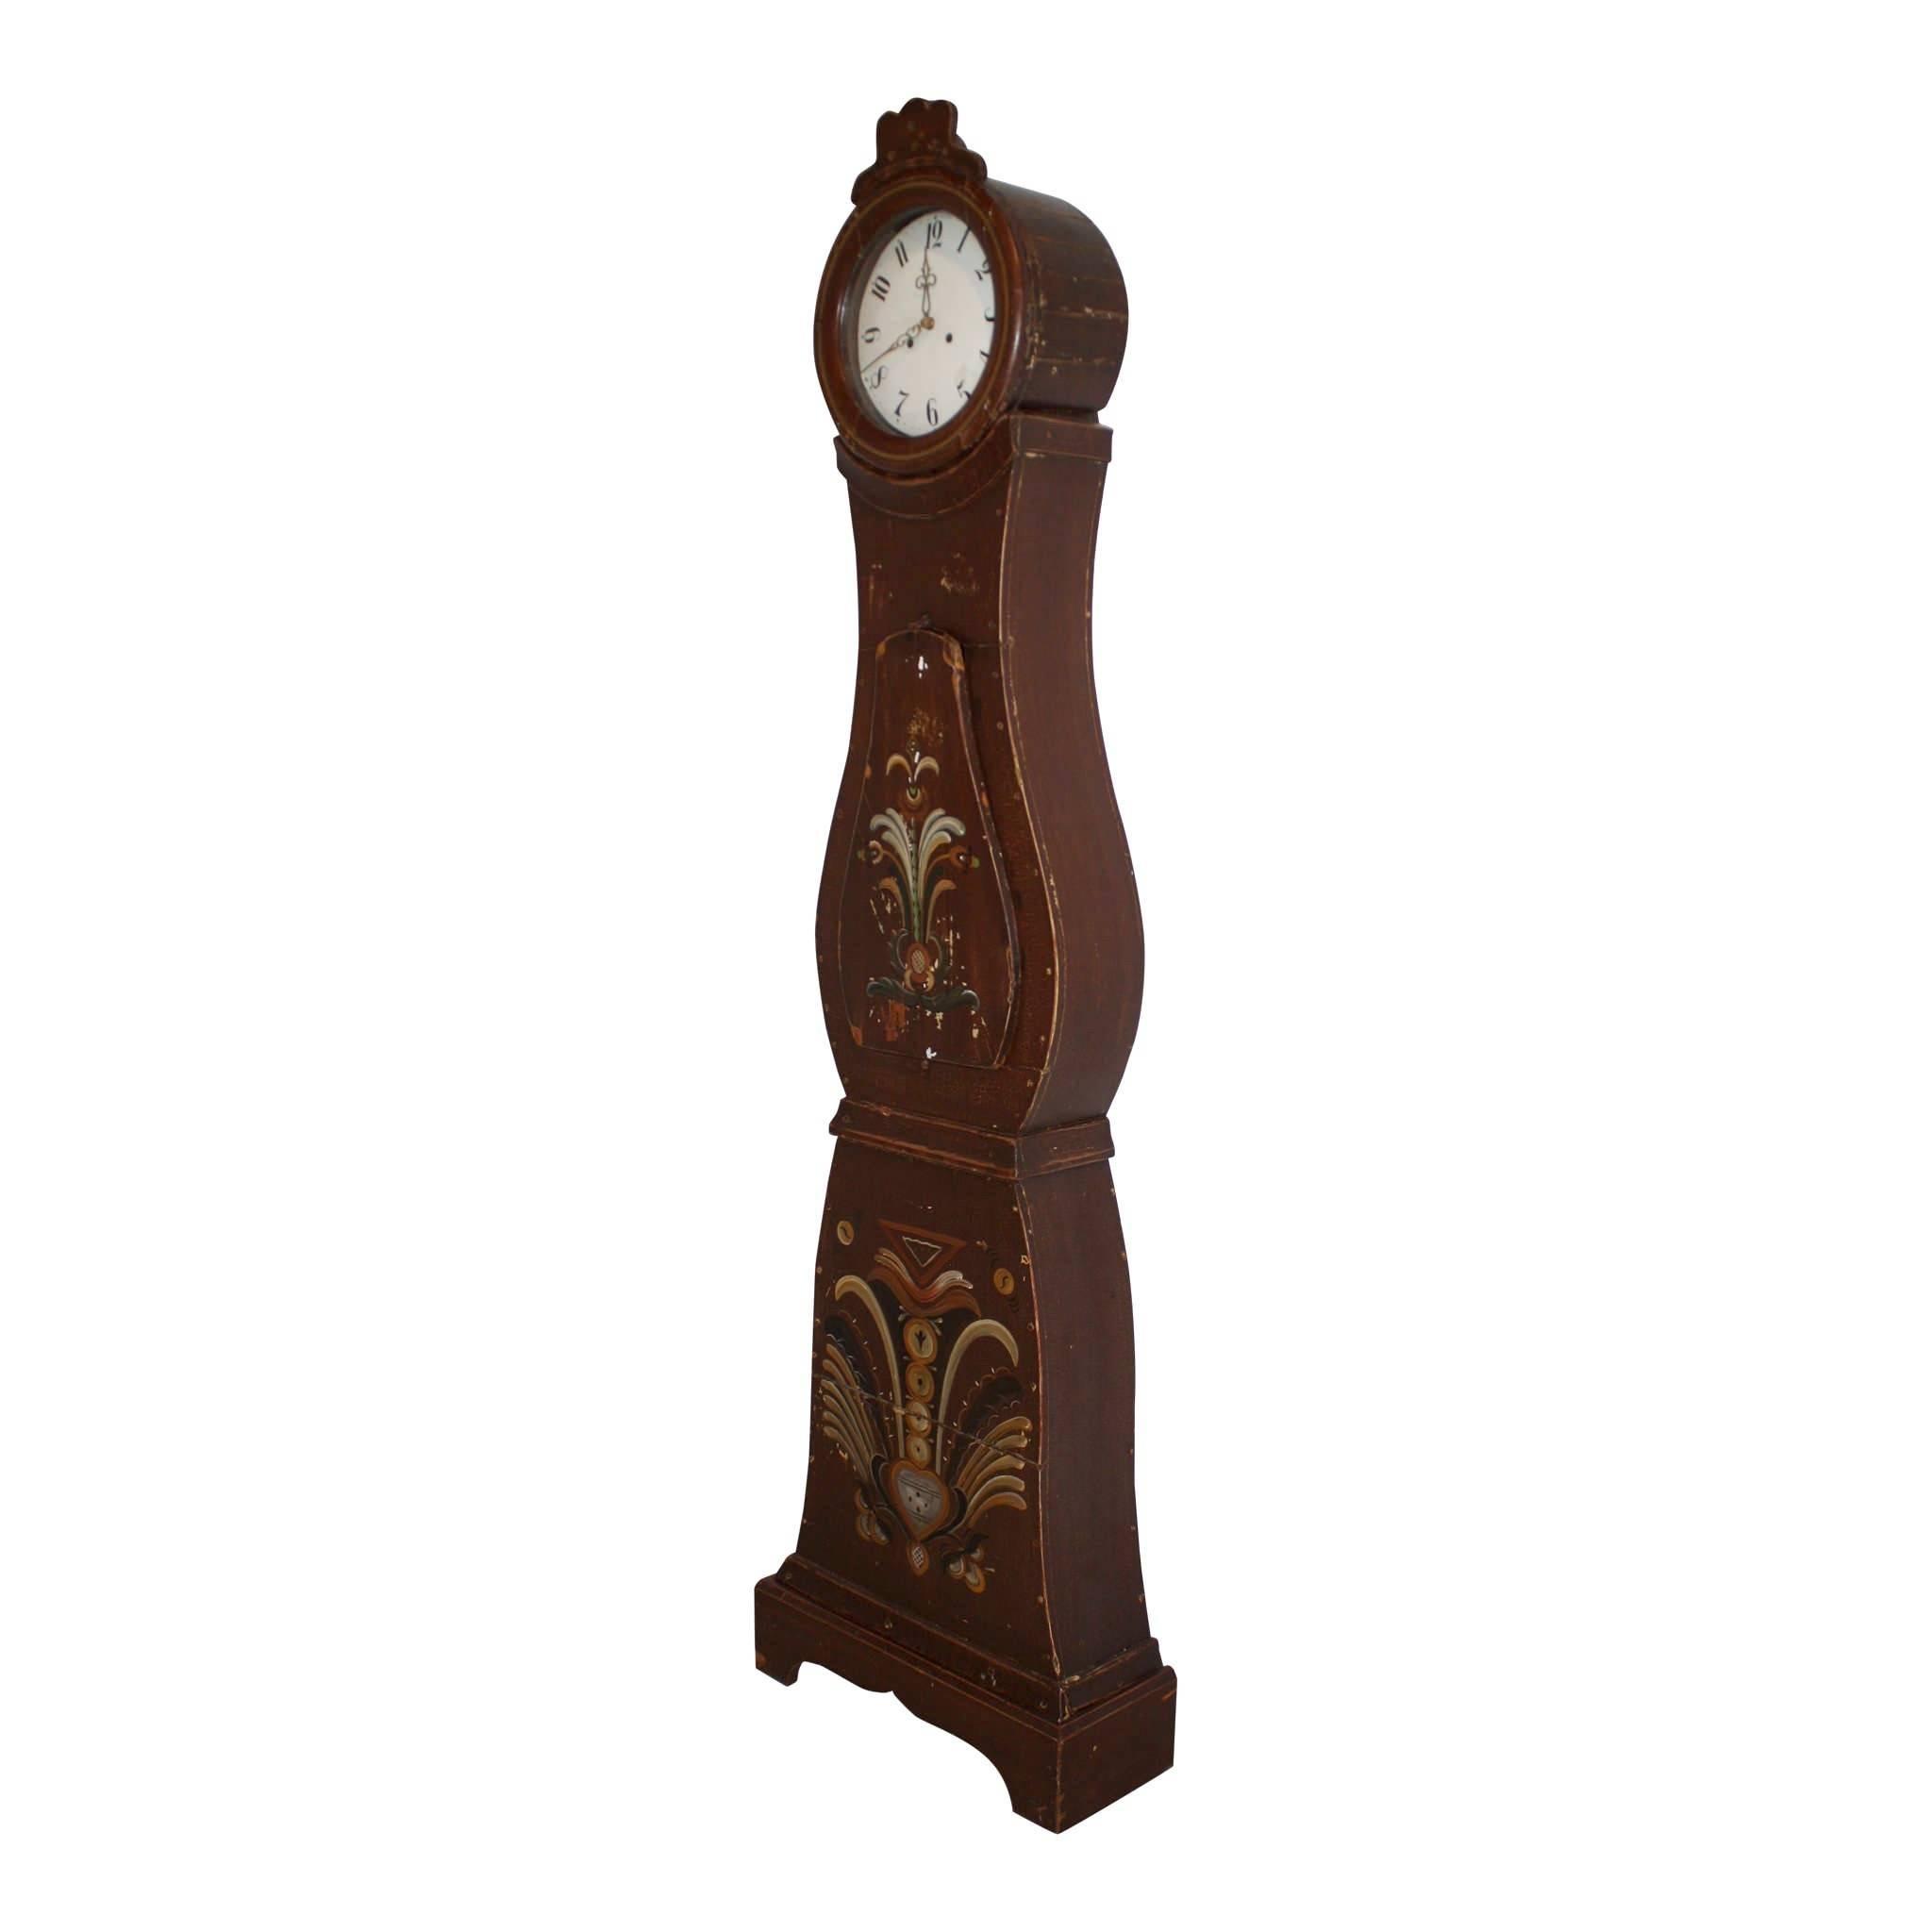 This Mora is crowned with a trilobe crest above the clock face, which is covered with convex hood glass. The face has a 10.75 inch diameter. The original clock movement has been replaced by a battery driven movement. The paint is original with a